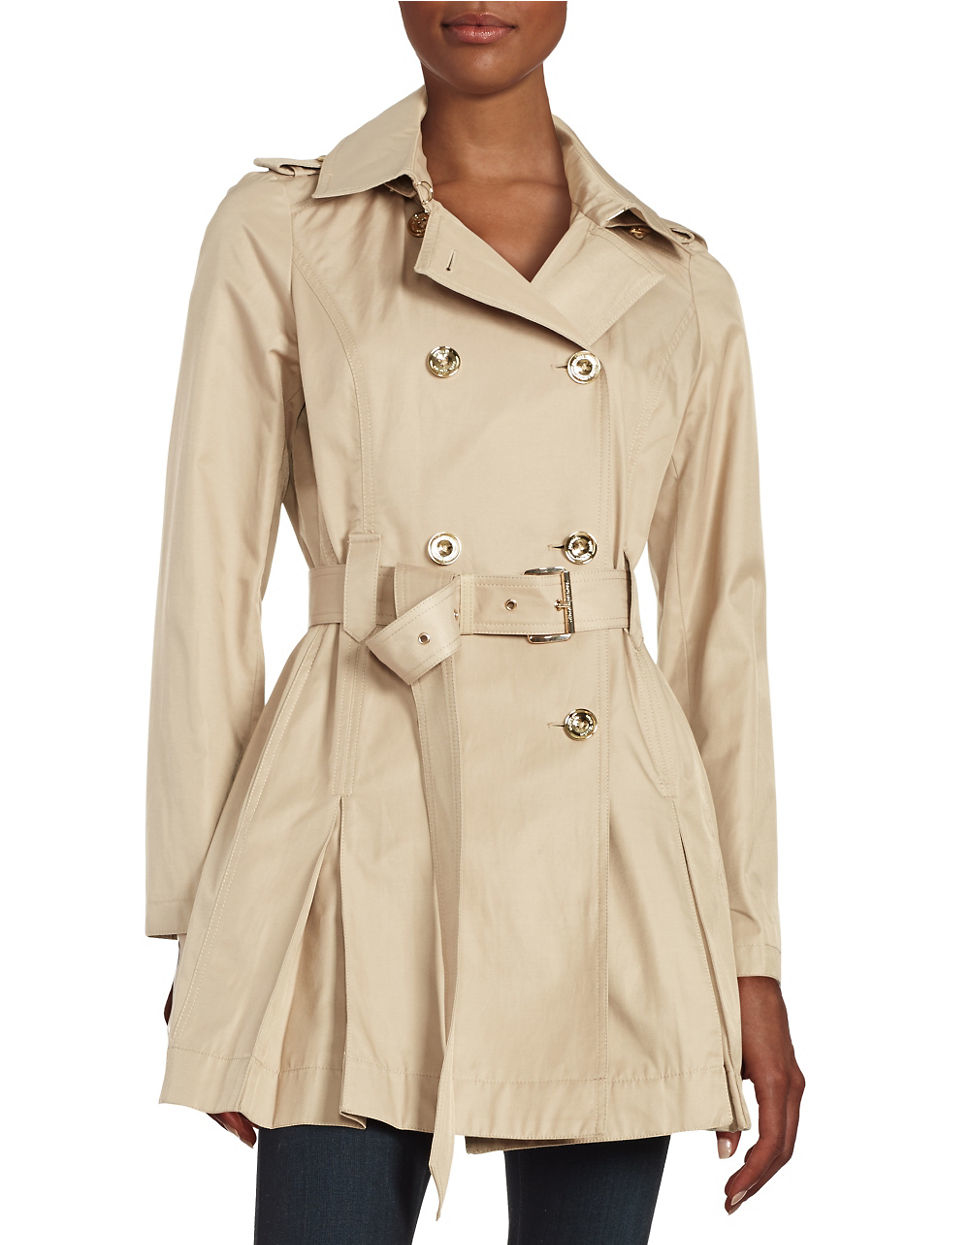 Michael kors Petite Hooded Double-breasted Trench Coat in Natural | Lyst